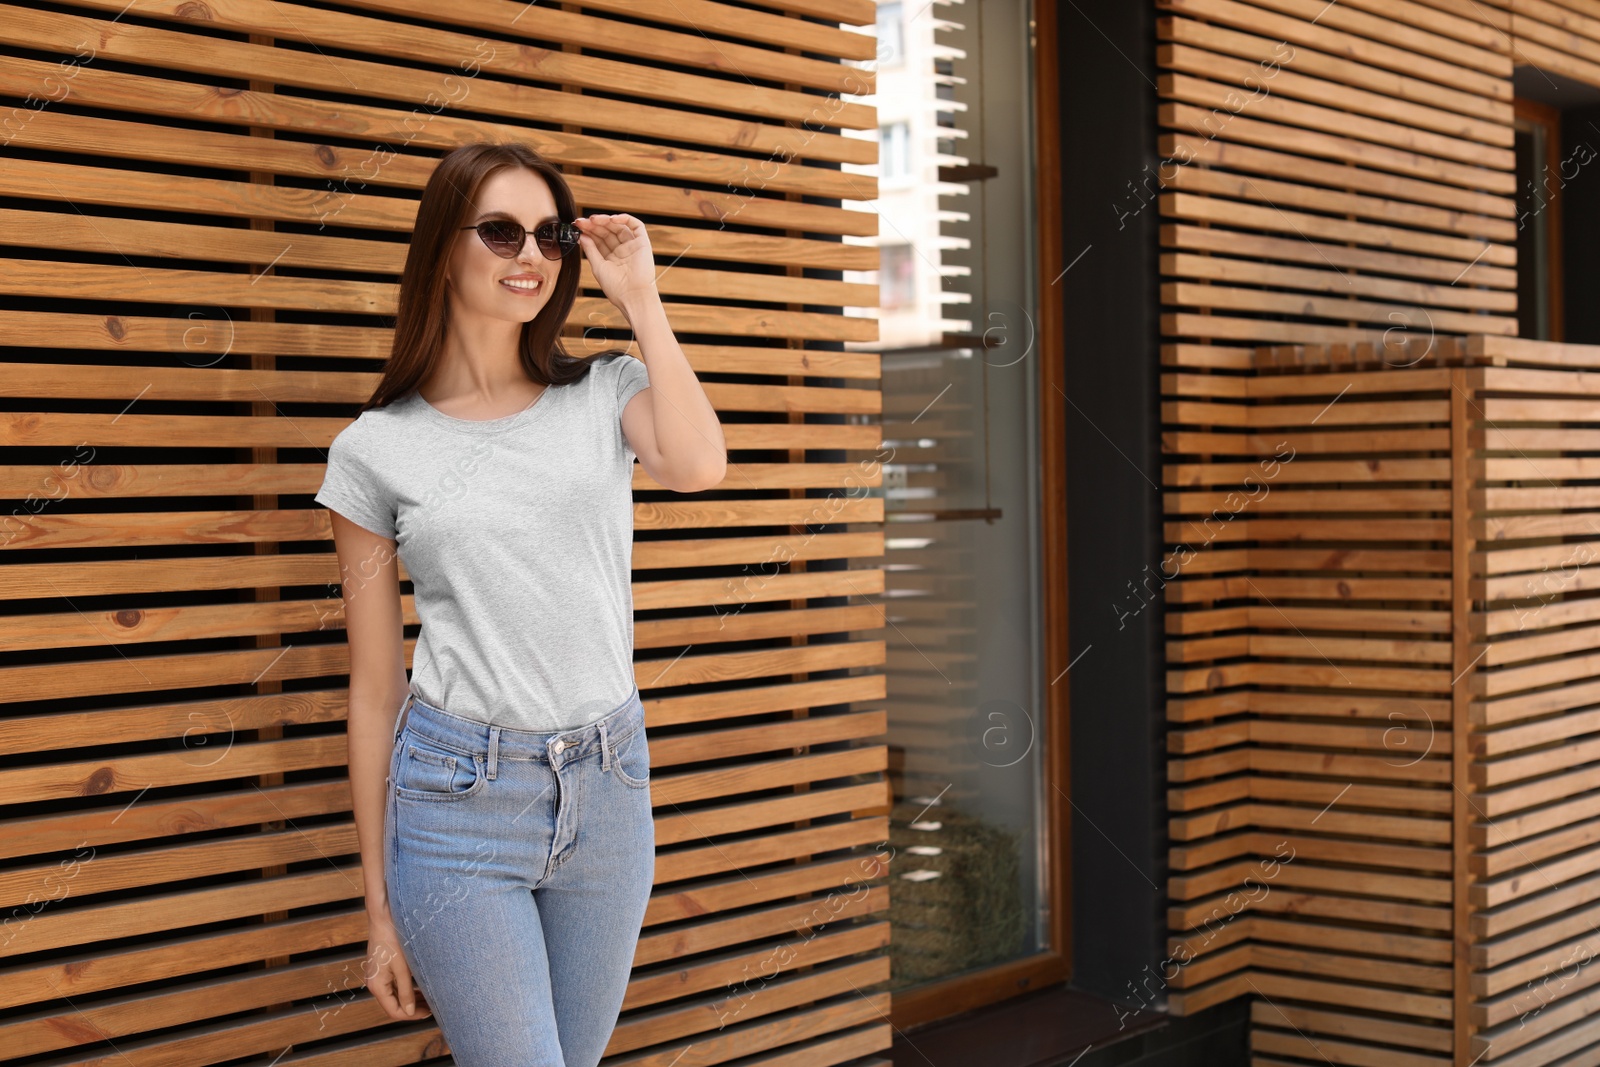 Photo of Young woman wearing gray t-shirt near wooden wall on street. Urban style